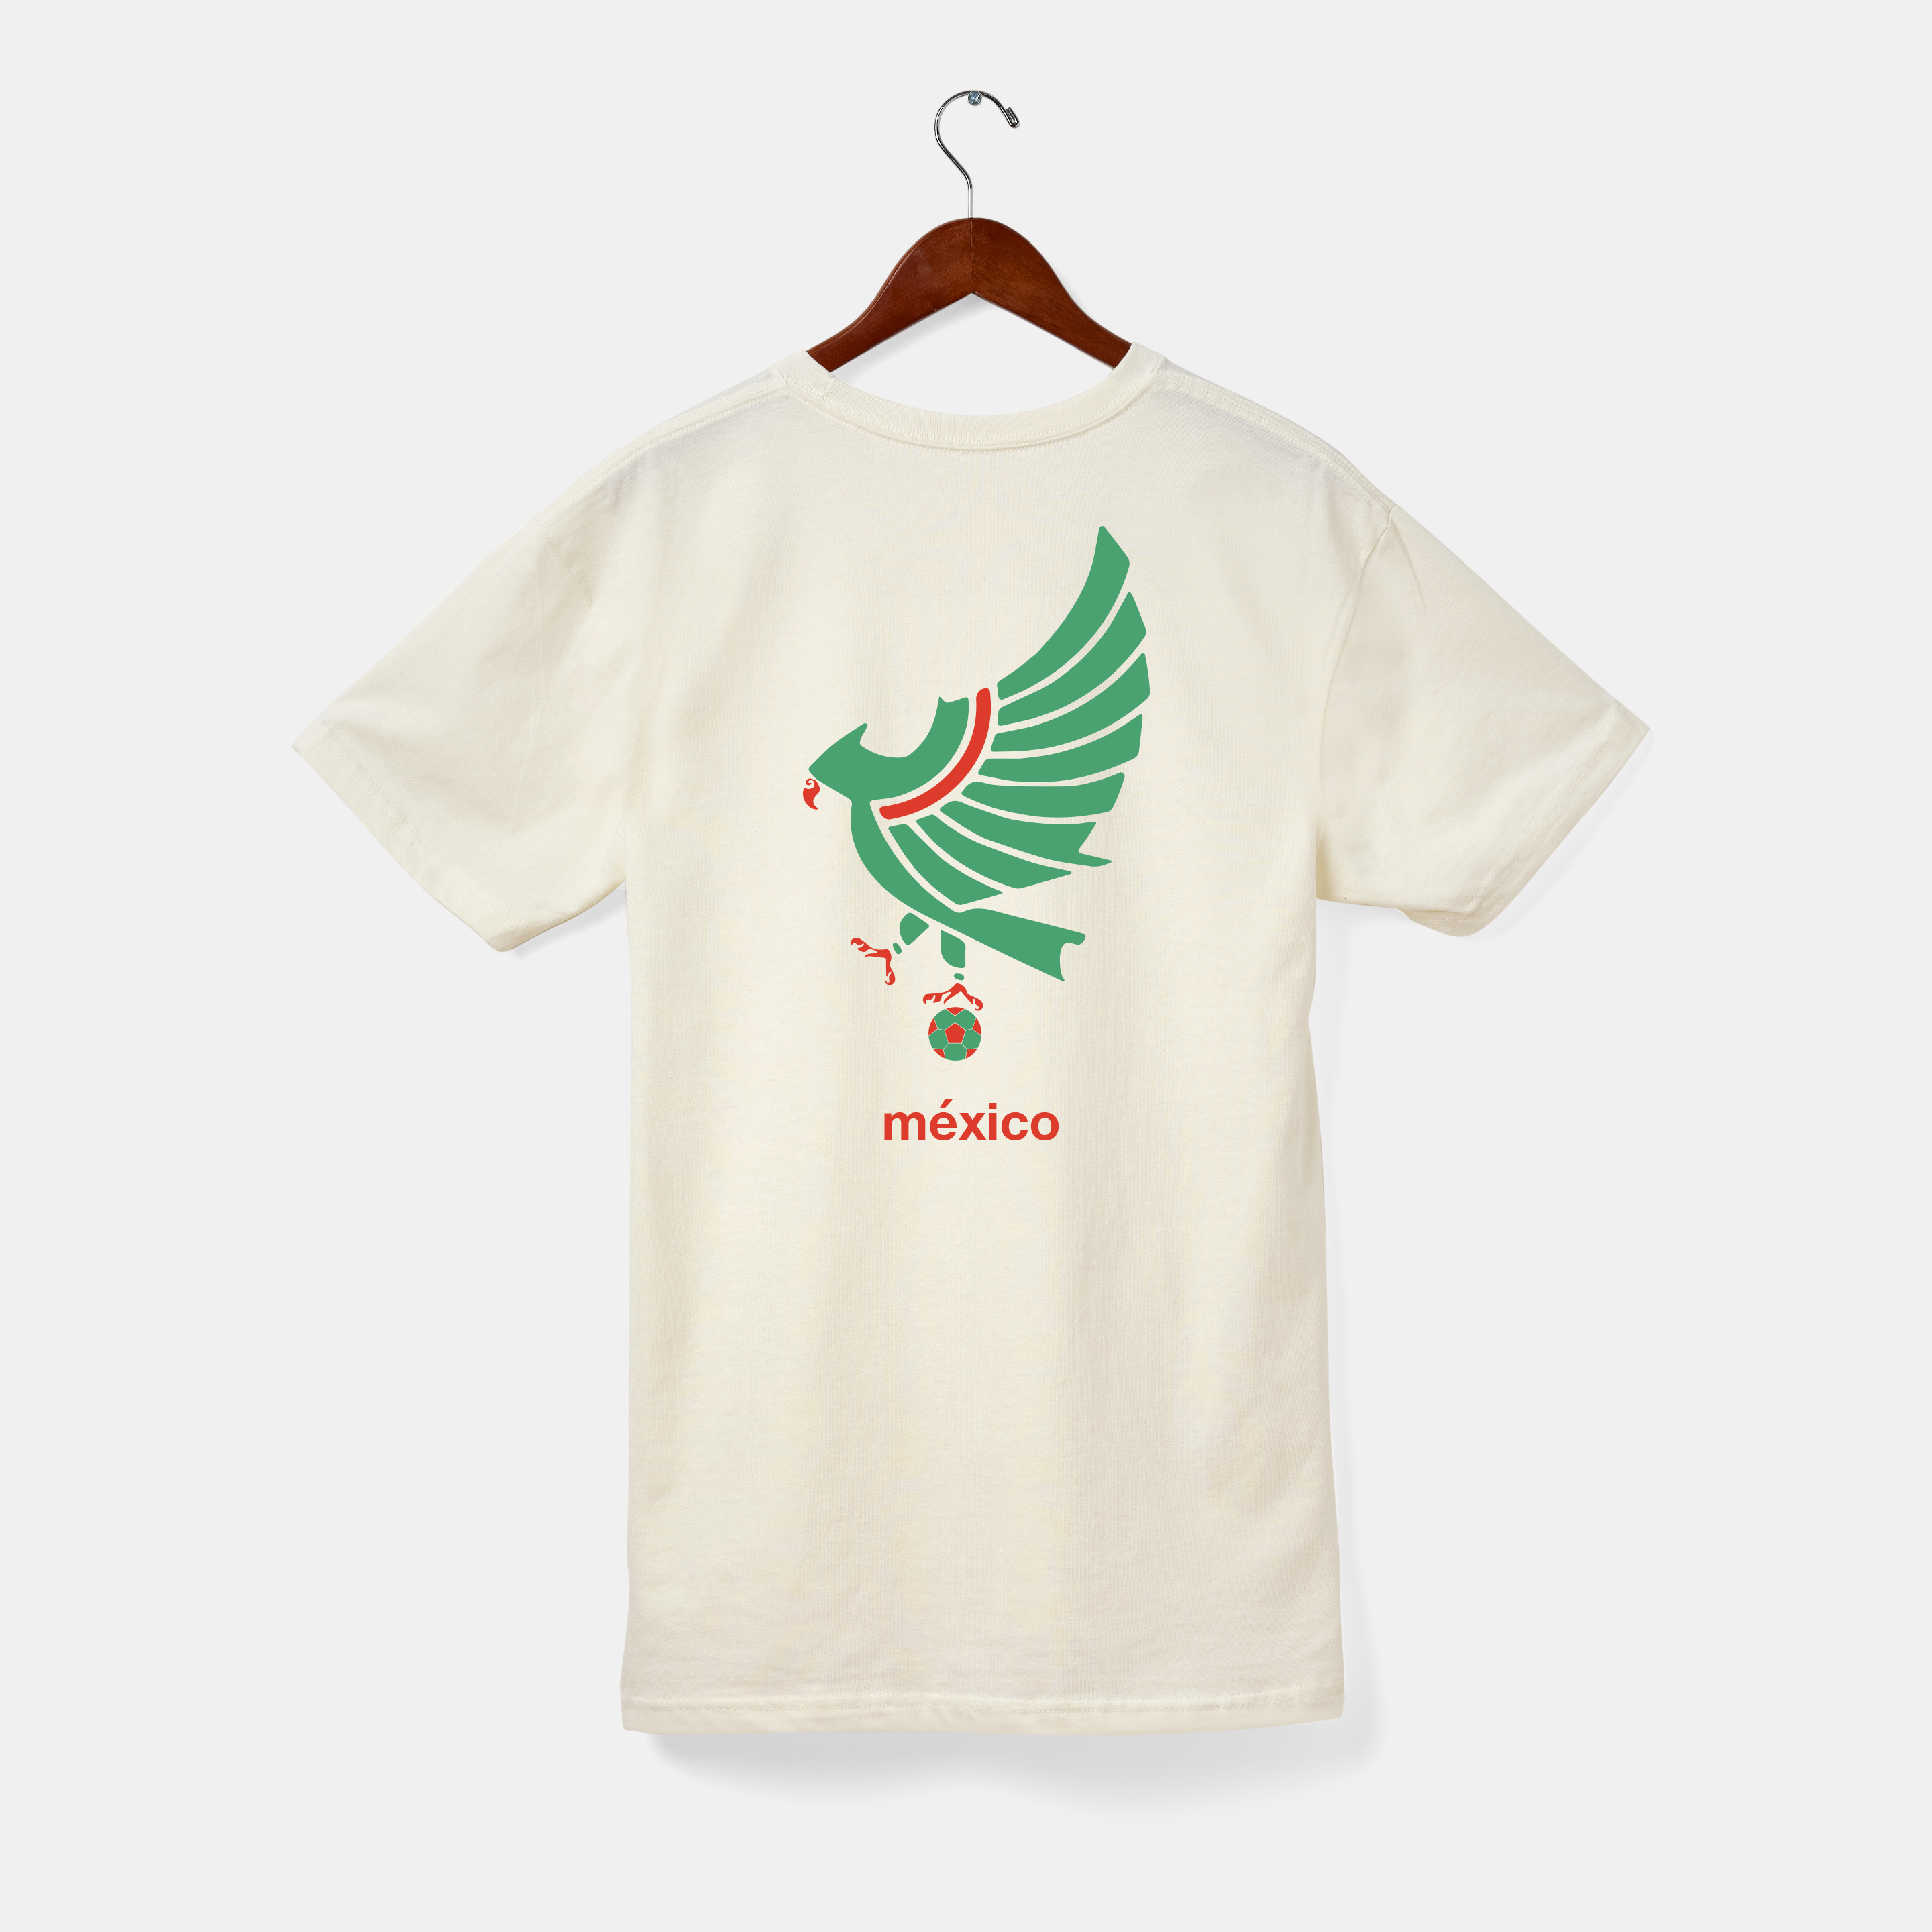 "Unofficial" Mexico Tee